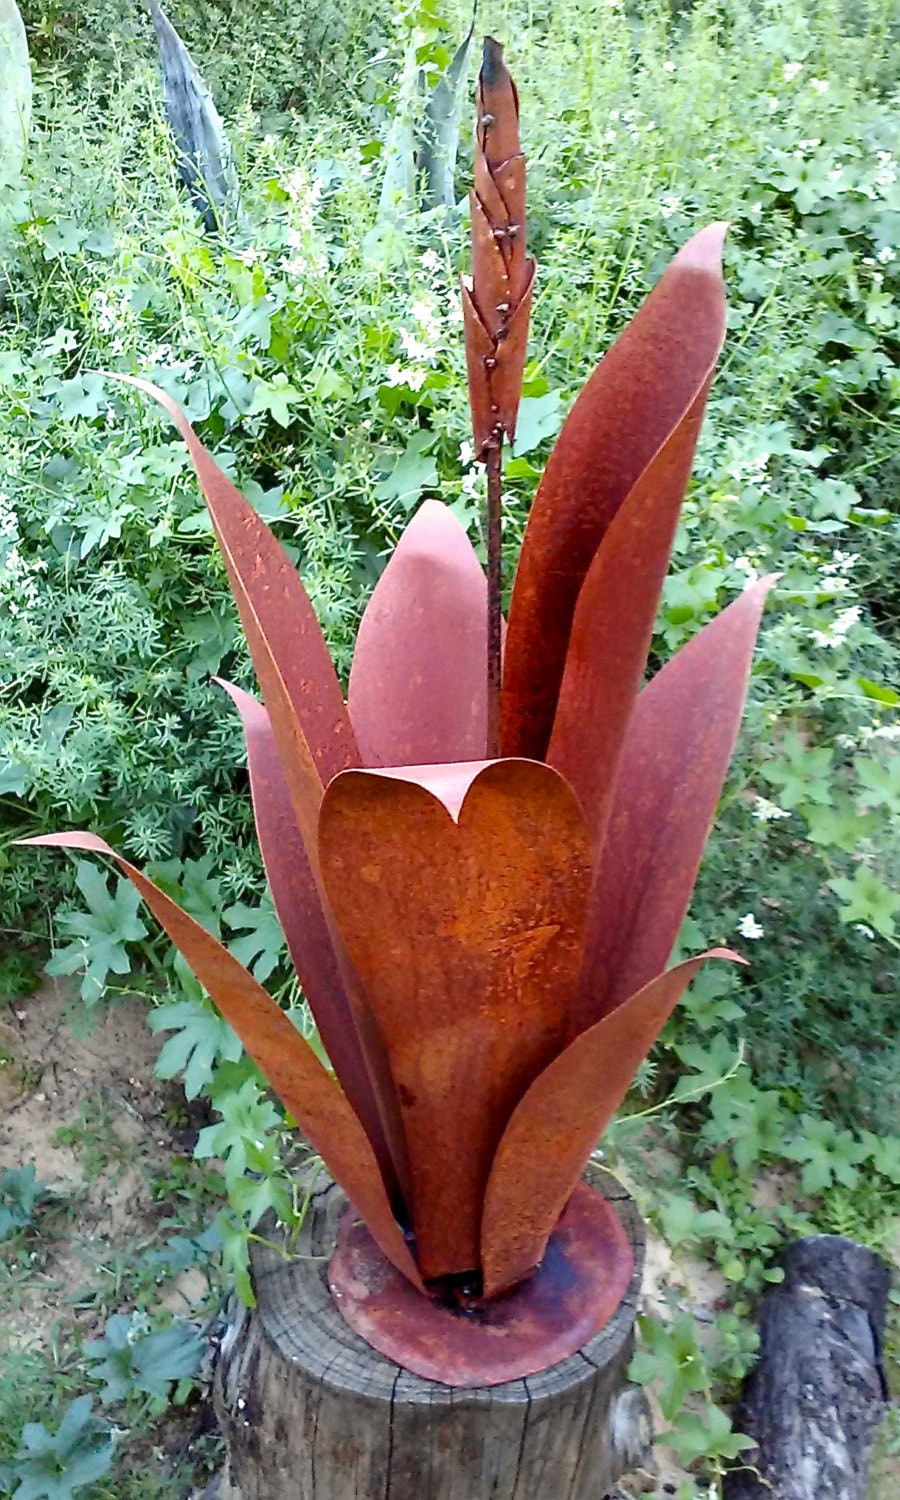 Budding Agave Rustic Metal Garden Sculpture Metal by ...